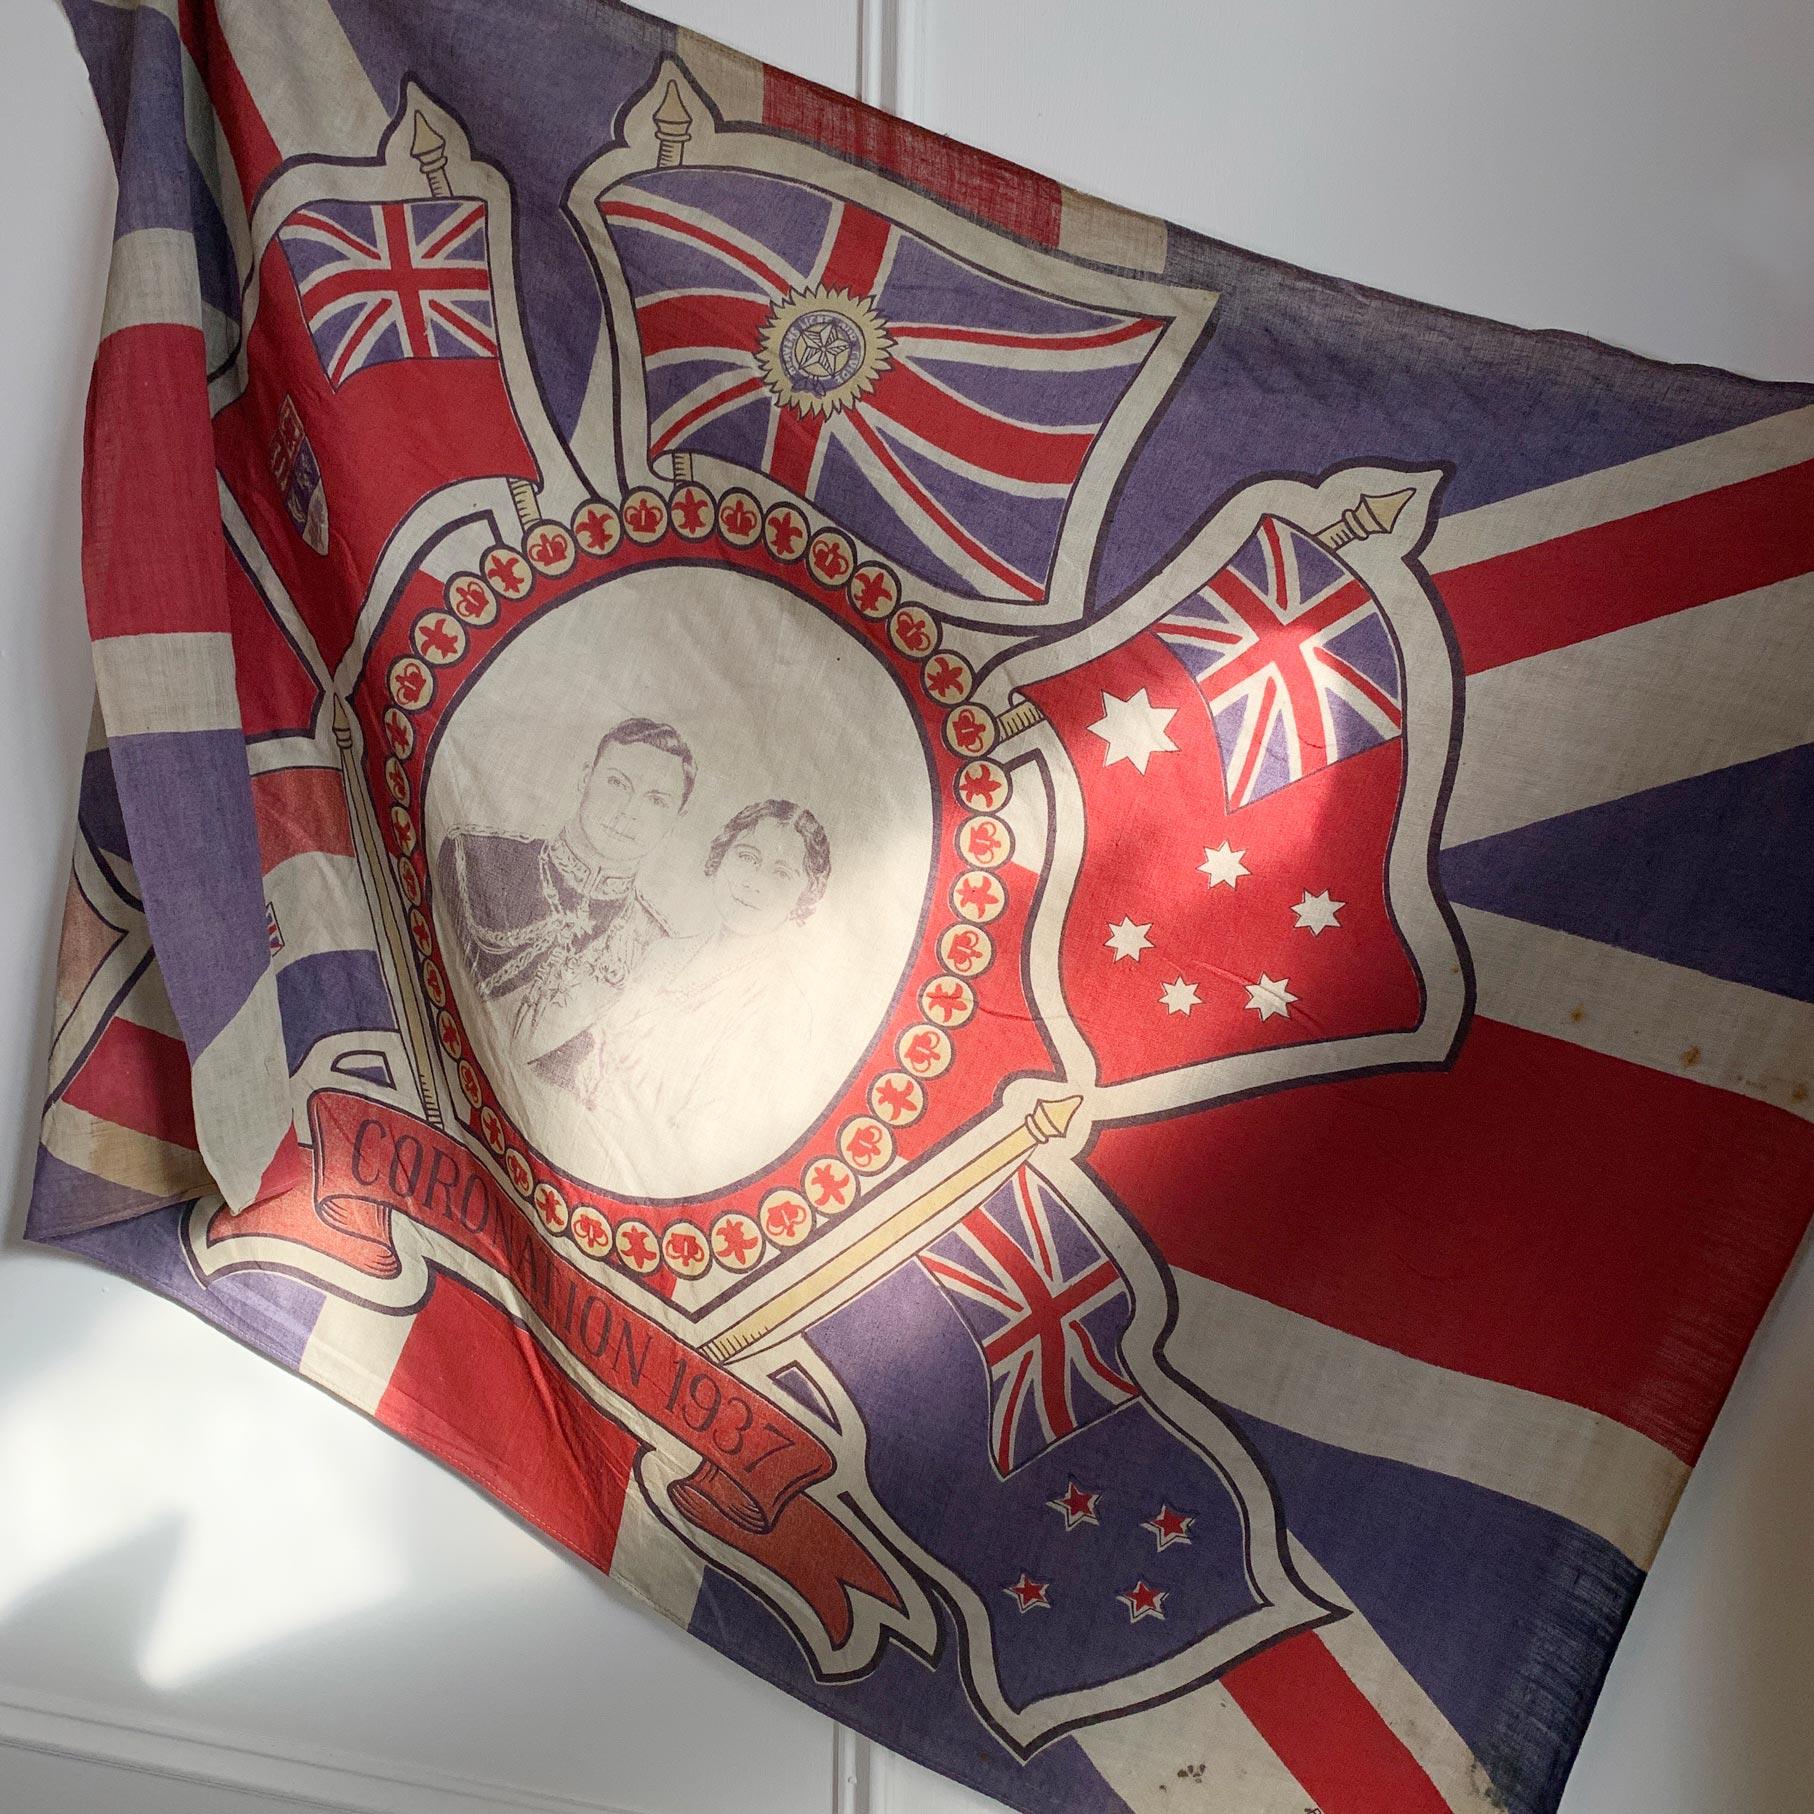 British Royal Family

A Rare And Historical Royal Coronation Flag from The Coronation Of HRH King George VI in 1937. Flag shows King George VI alongside Queen Elizabeth the Queen Mother.
 
George VI (Albert Frederick Arthur George; 14 December